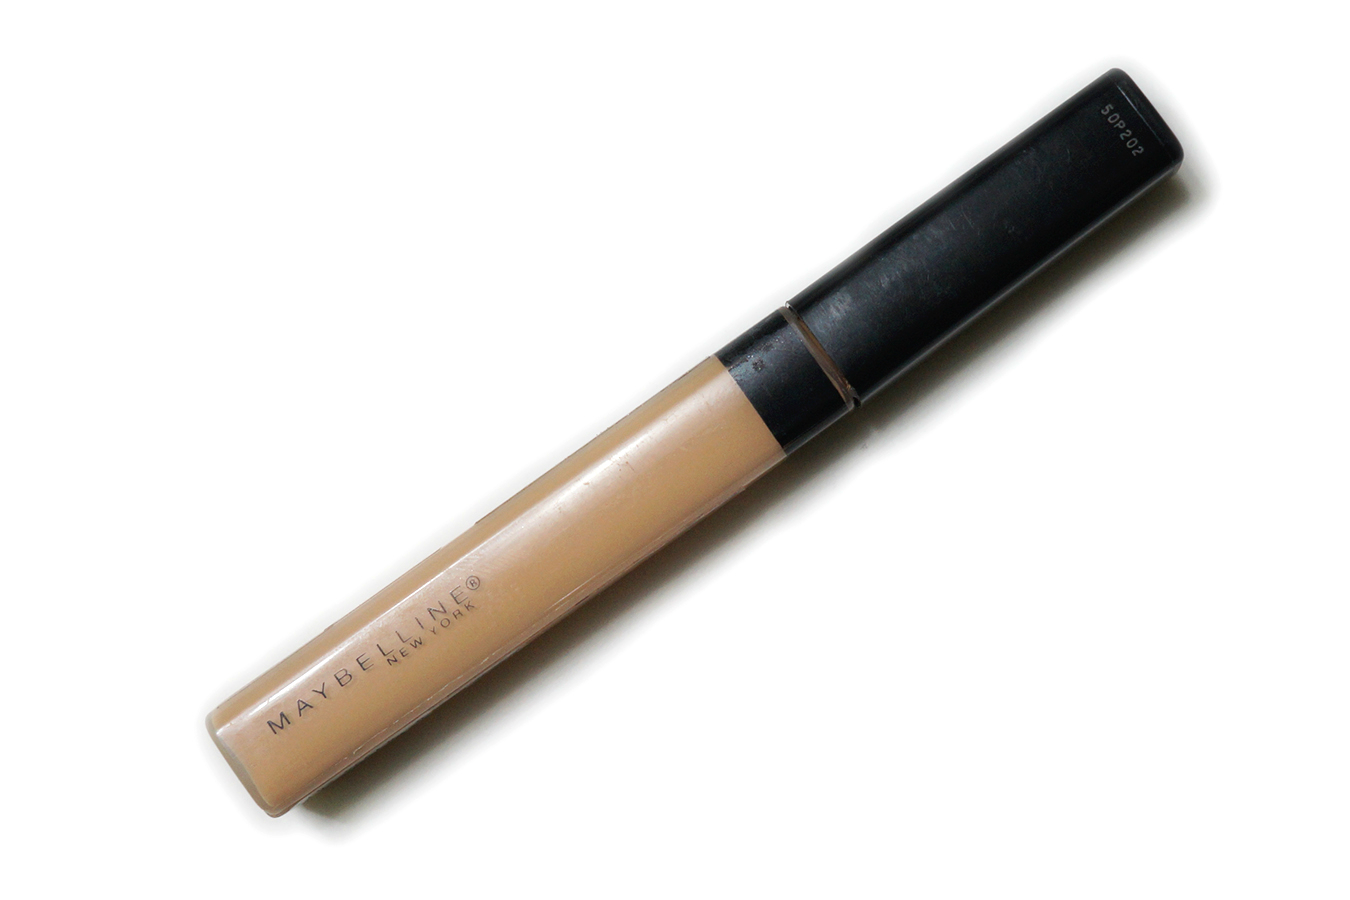 Maybelline Fit Me Concealer 20 Sable | Review, Photos, Swatches Jello Beans